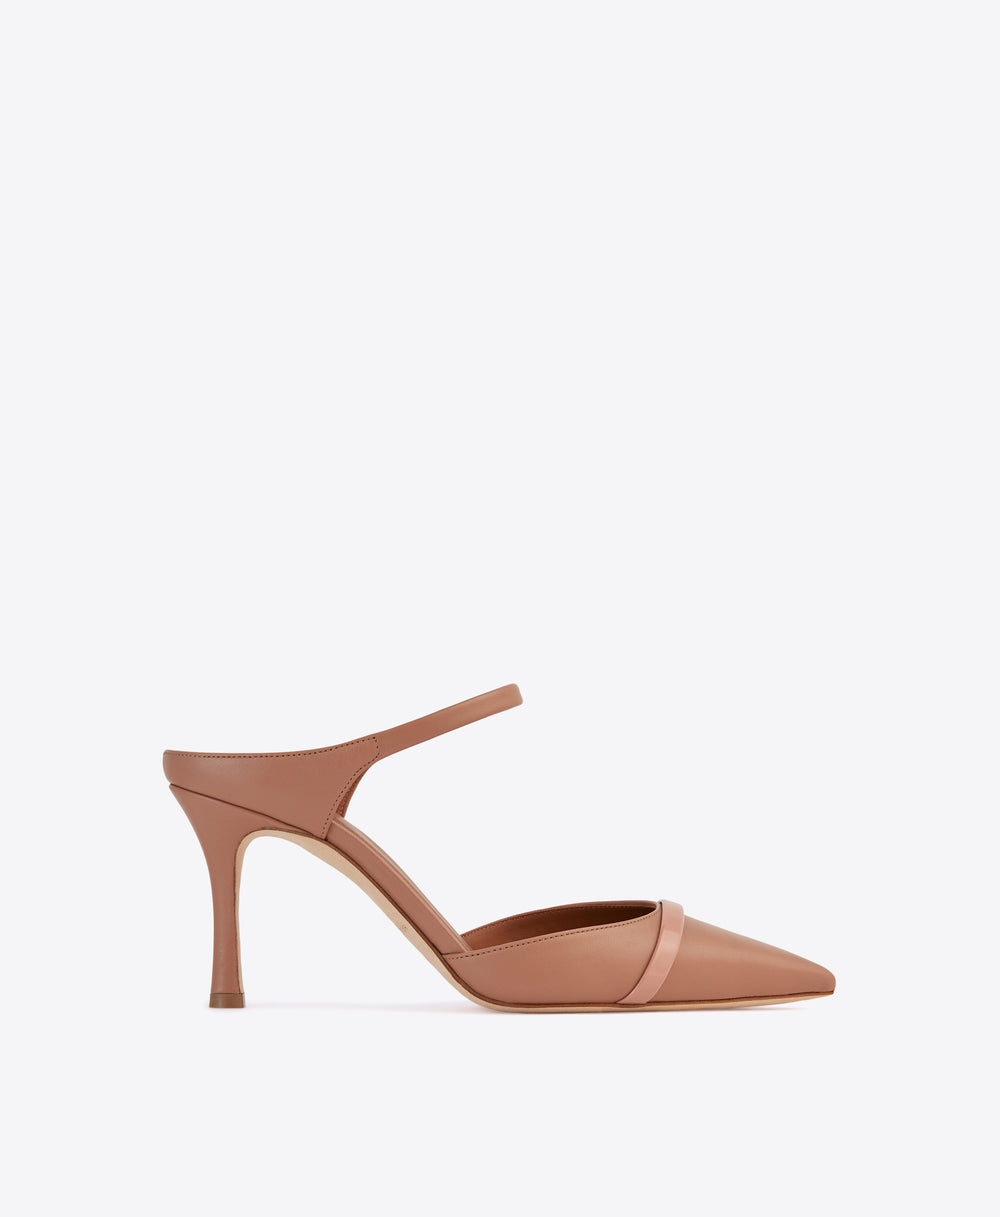 Women's Nude Leather Heeled Mules Malone Souliers